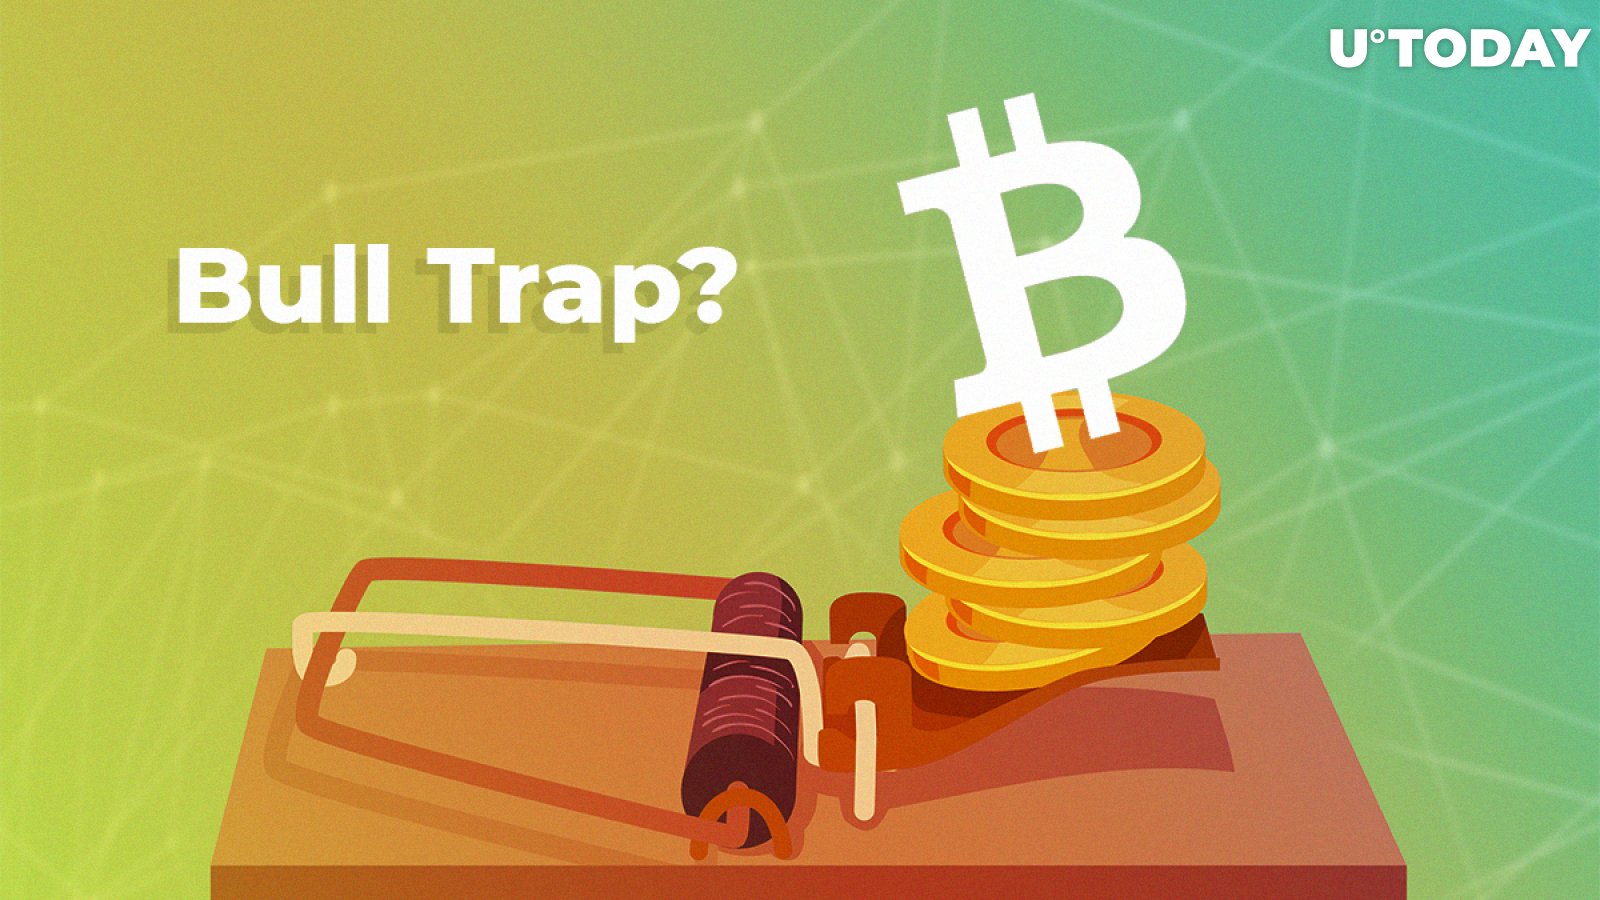 Bitcoin Price Halts Its Rally — Is $10,000 Next or Is This a Bull Trap Back Below $6,000?